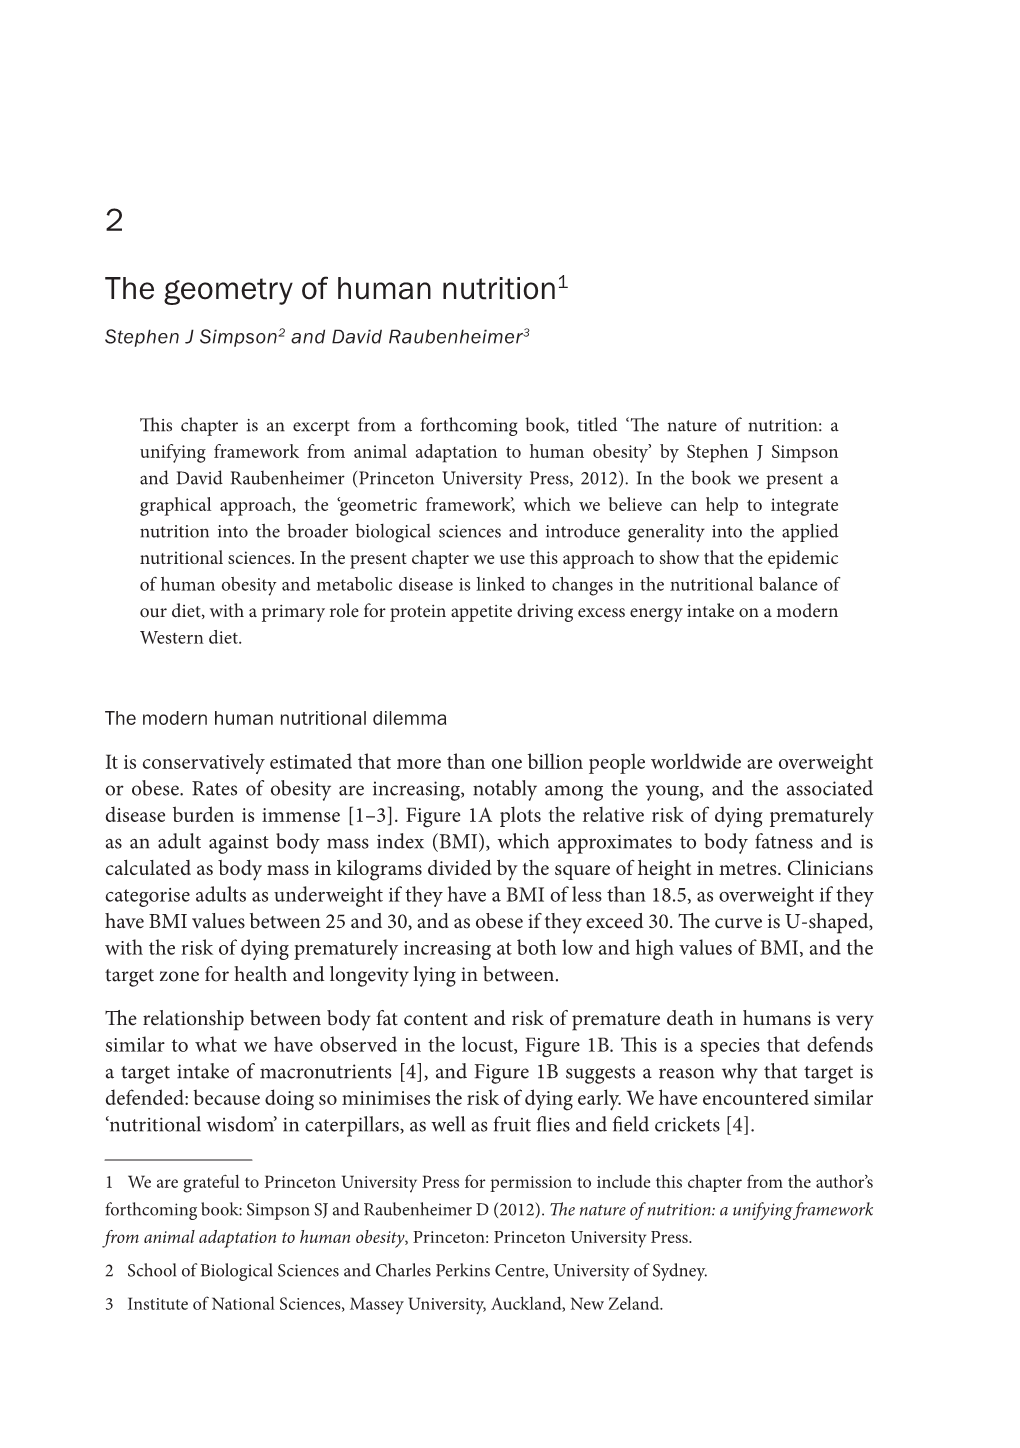 2 the Geometry of Human Nutrition1